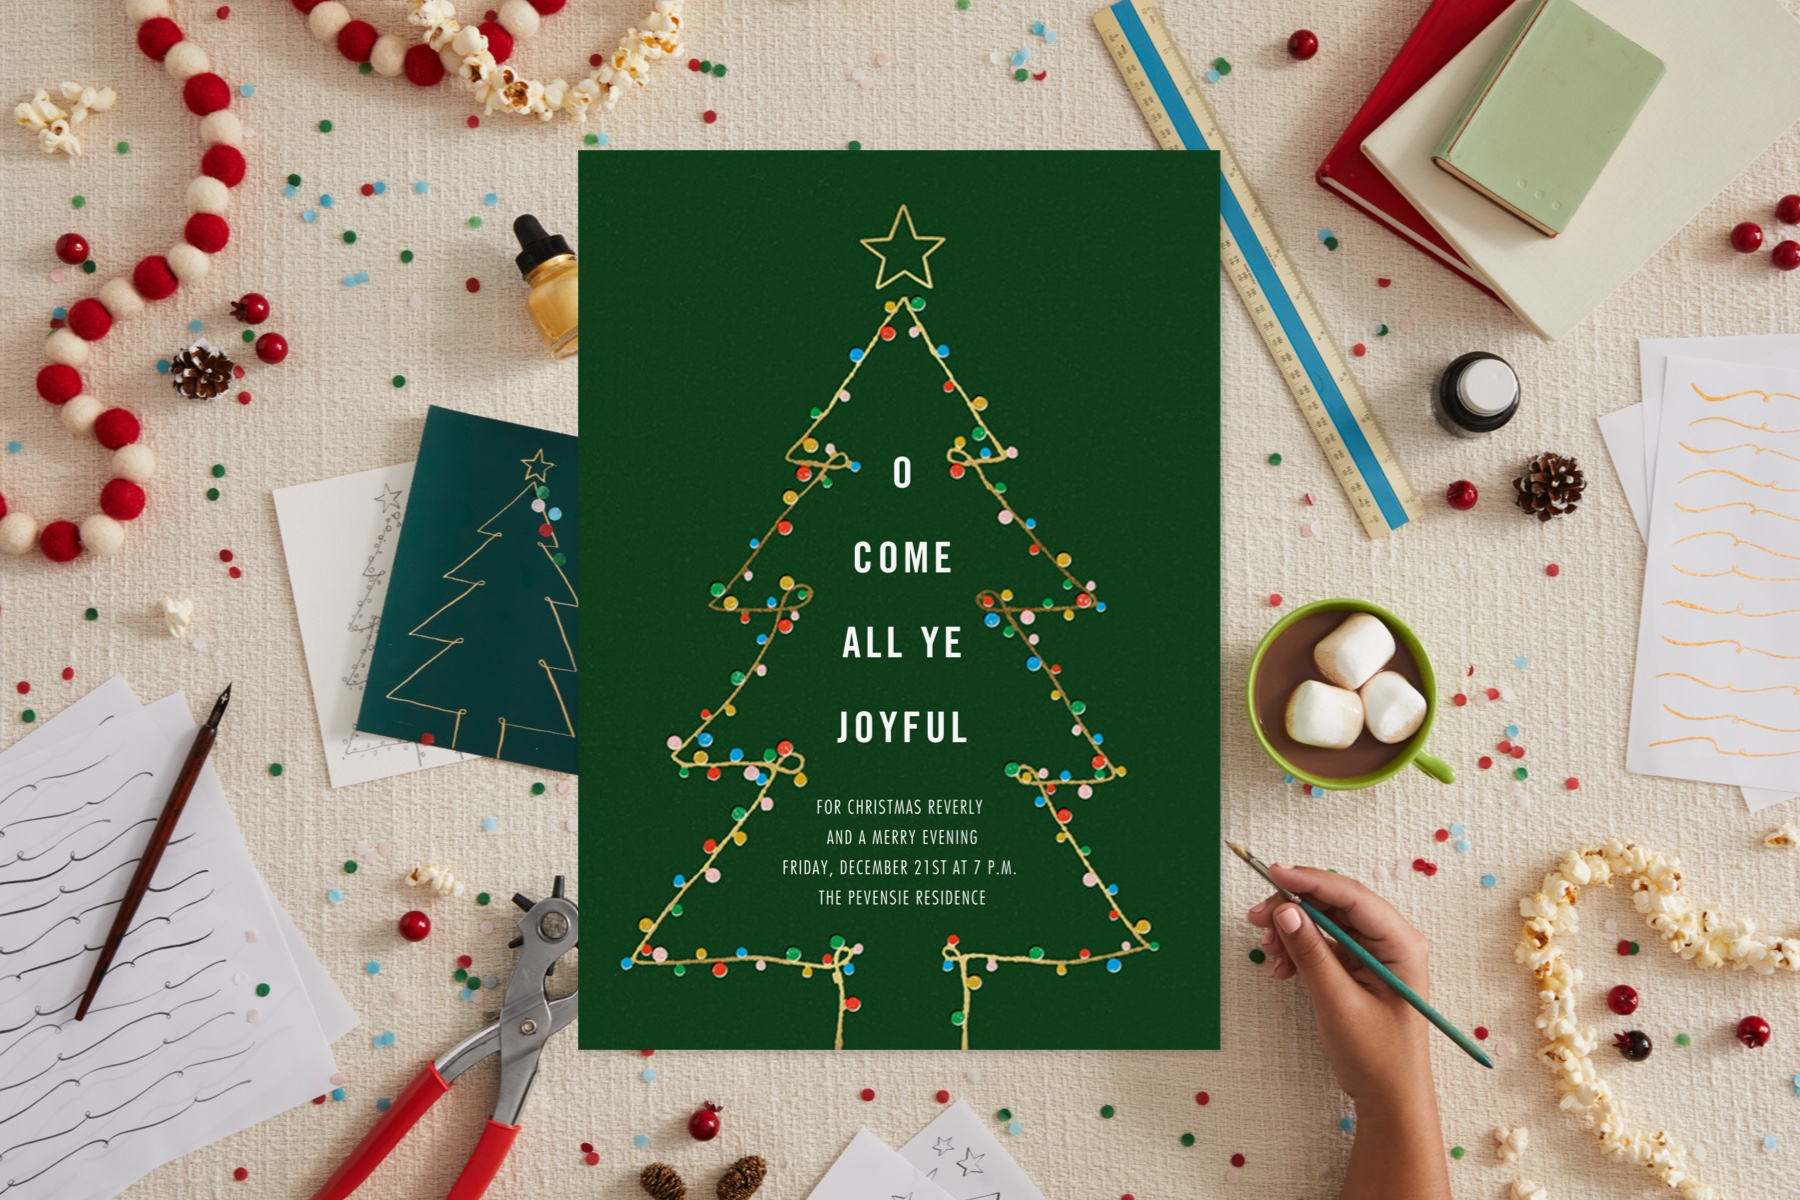 A Christmas invitation surrounded by objects of inspiration like sketch paper, garland, and hot cocoa.